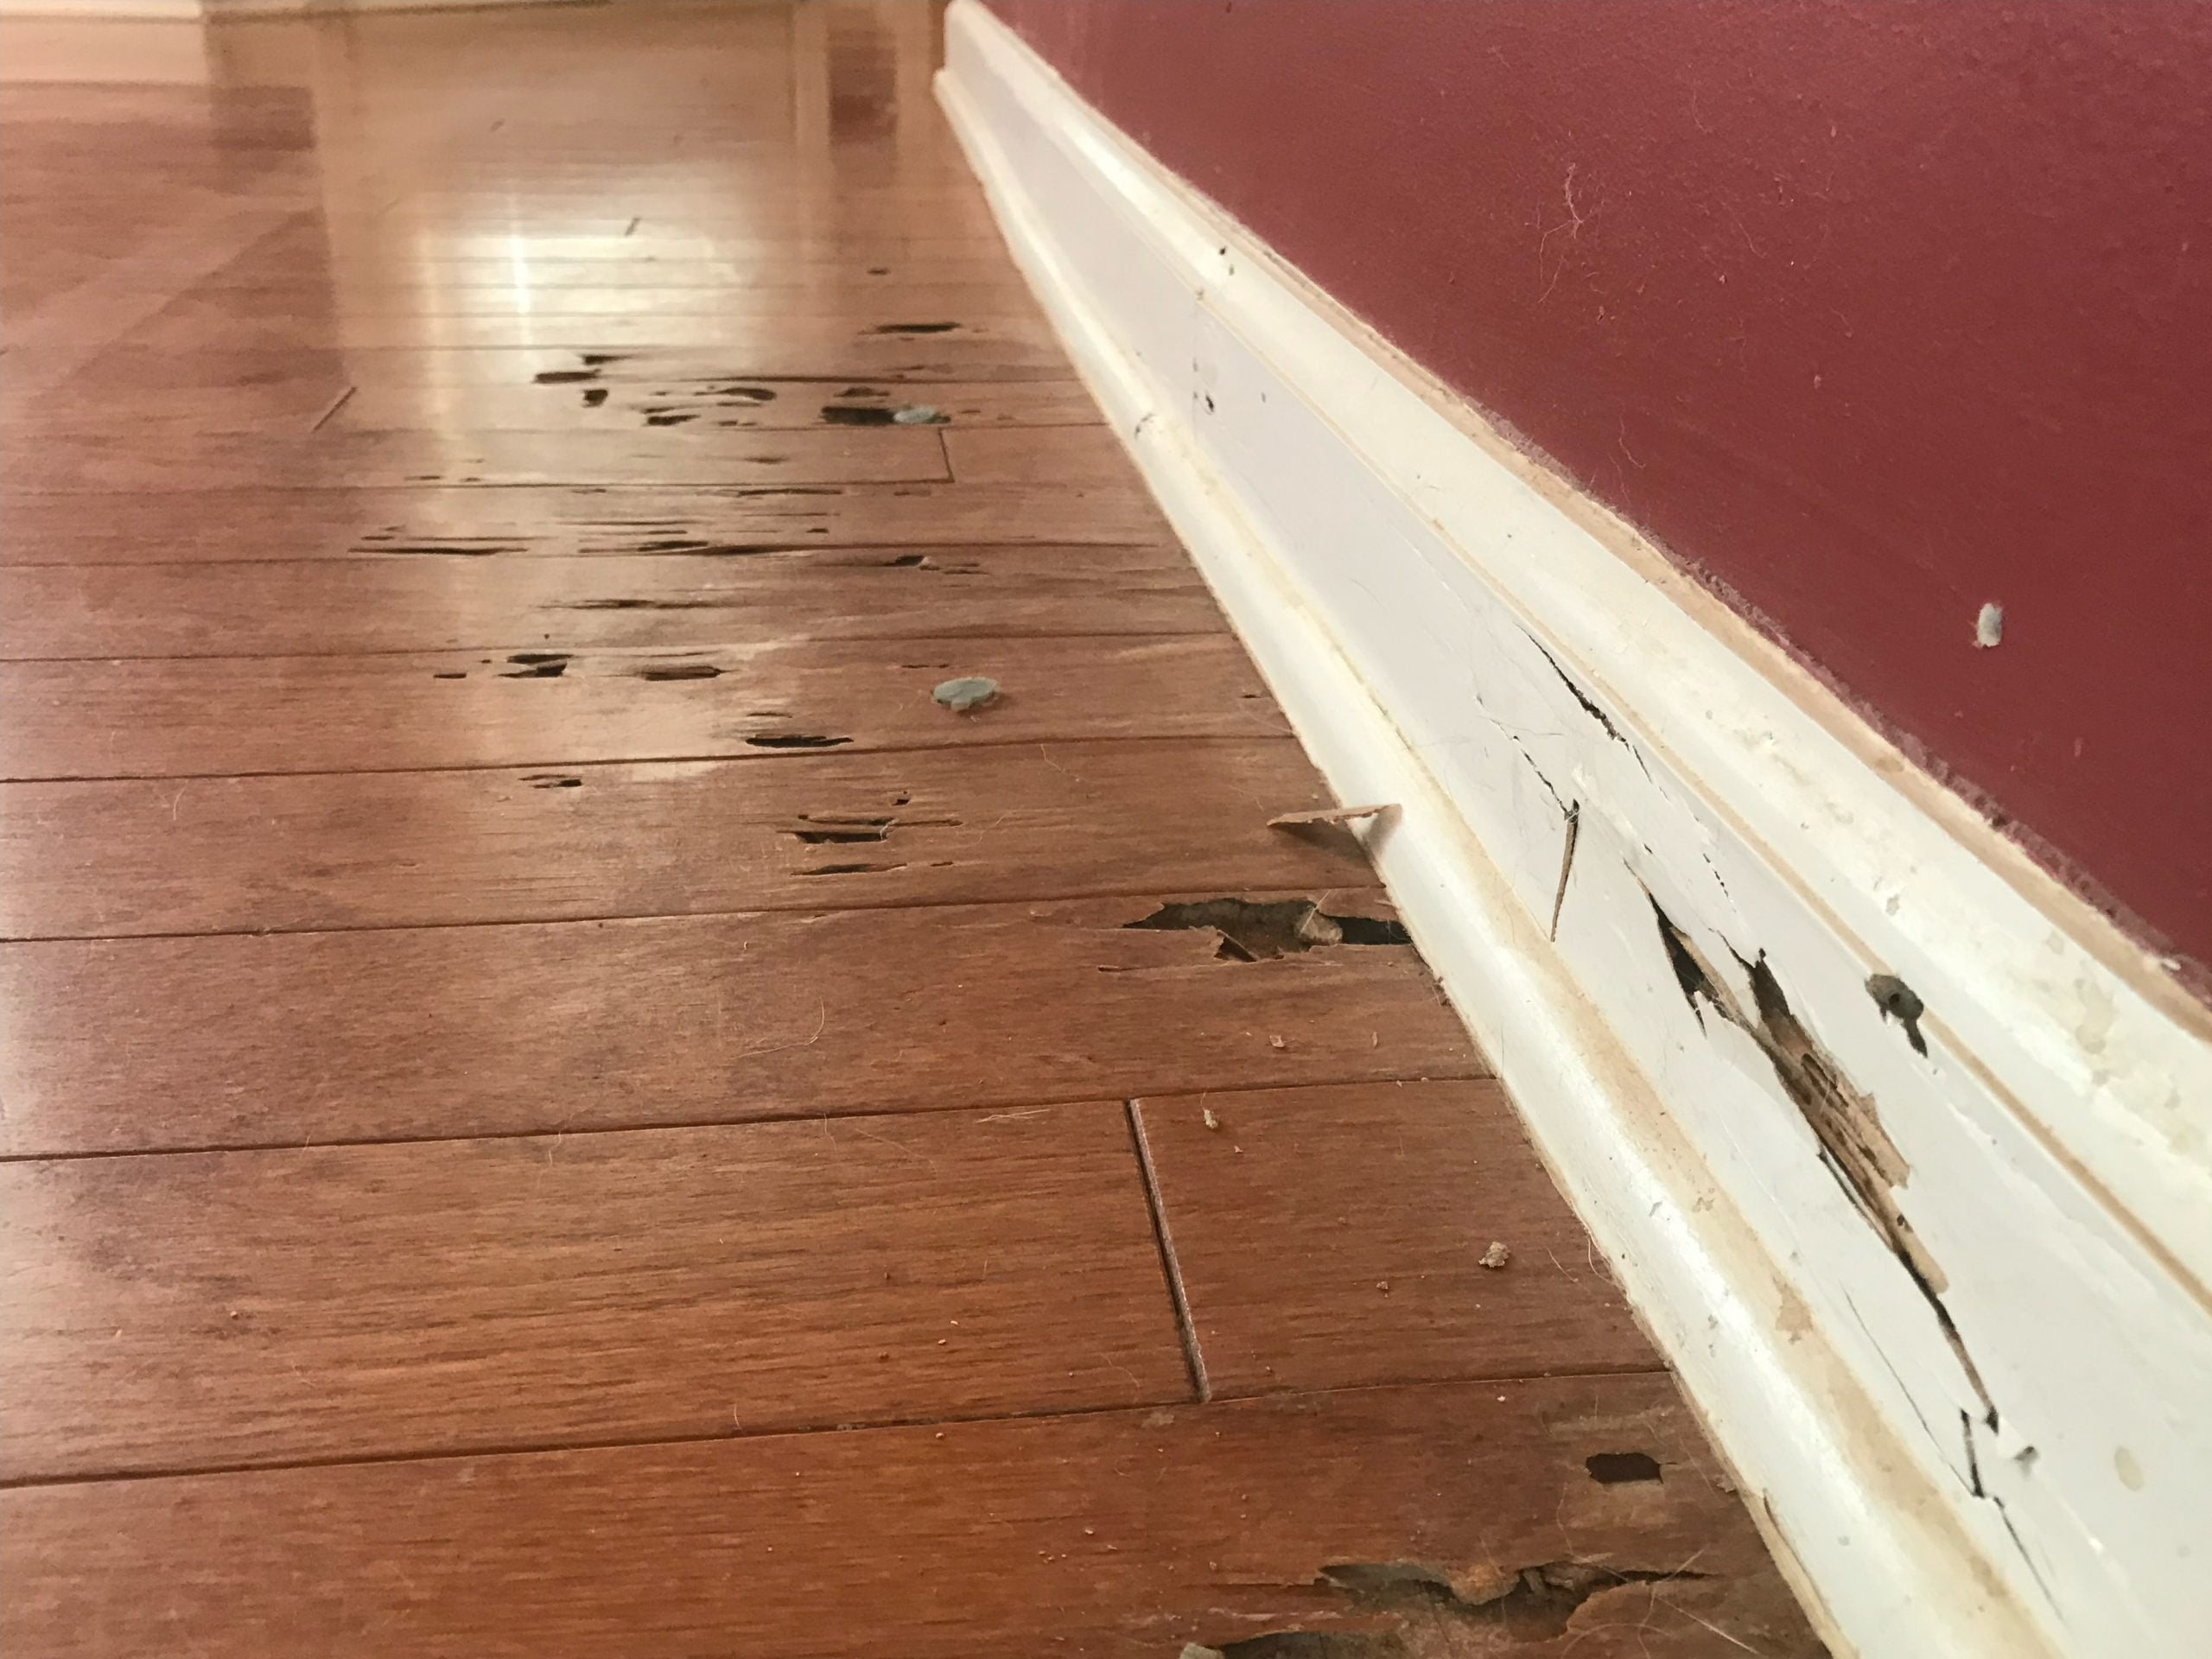 A photo of termite damage found in a home inspection.